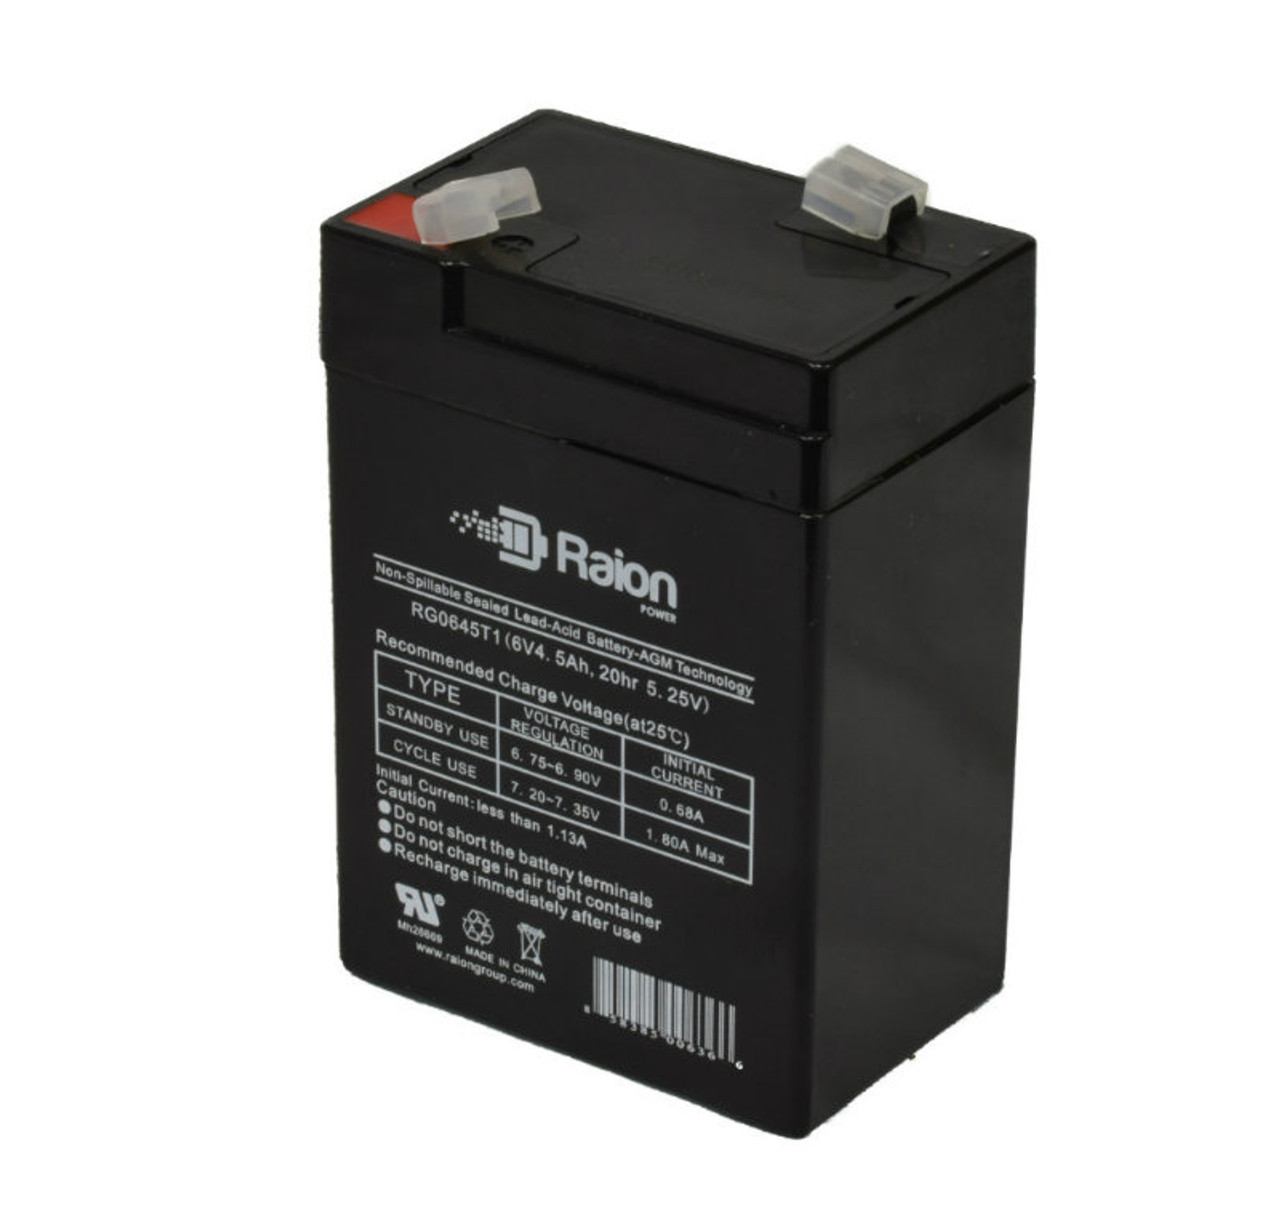 Raion Power RG0645T1 6V 4.5Ah Replacement Battery Cartridge for Sunnyway SW640